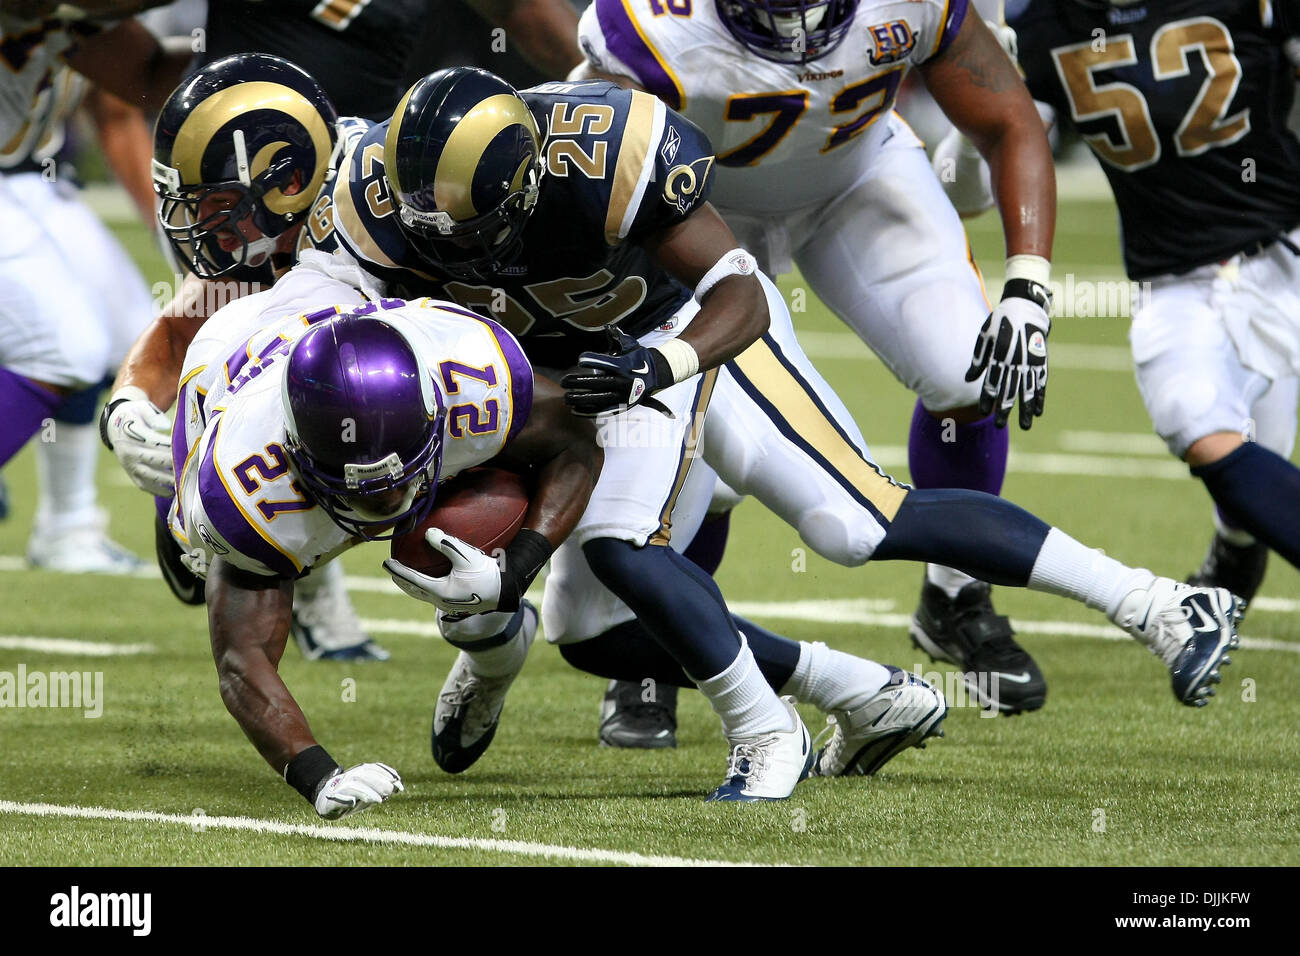 Aug. 14, 2010 - Saint Louis, Missouri, United States of America - August 14, 2010:  Minnesota Vikings Running Back Darius Reynaud (#27) goes gown after being tackled by Saint Louis Rams Free Safety David Roach (#27) and Saint Louis Rams Defensive Back MARQUIS JOHNSON (#25)during a preseason game between the Saint Louis Rams and the Minnesota Vikings held at the Edward Jones Dome in Stock Photo